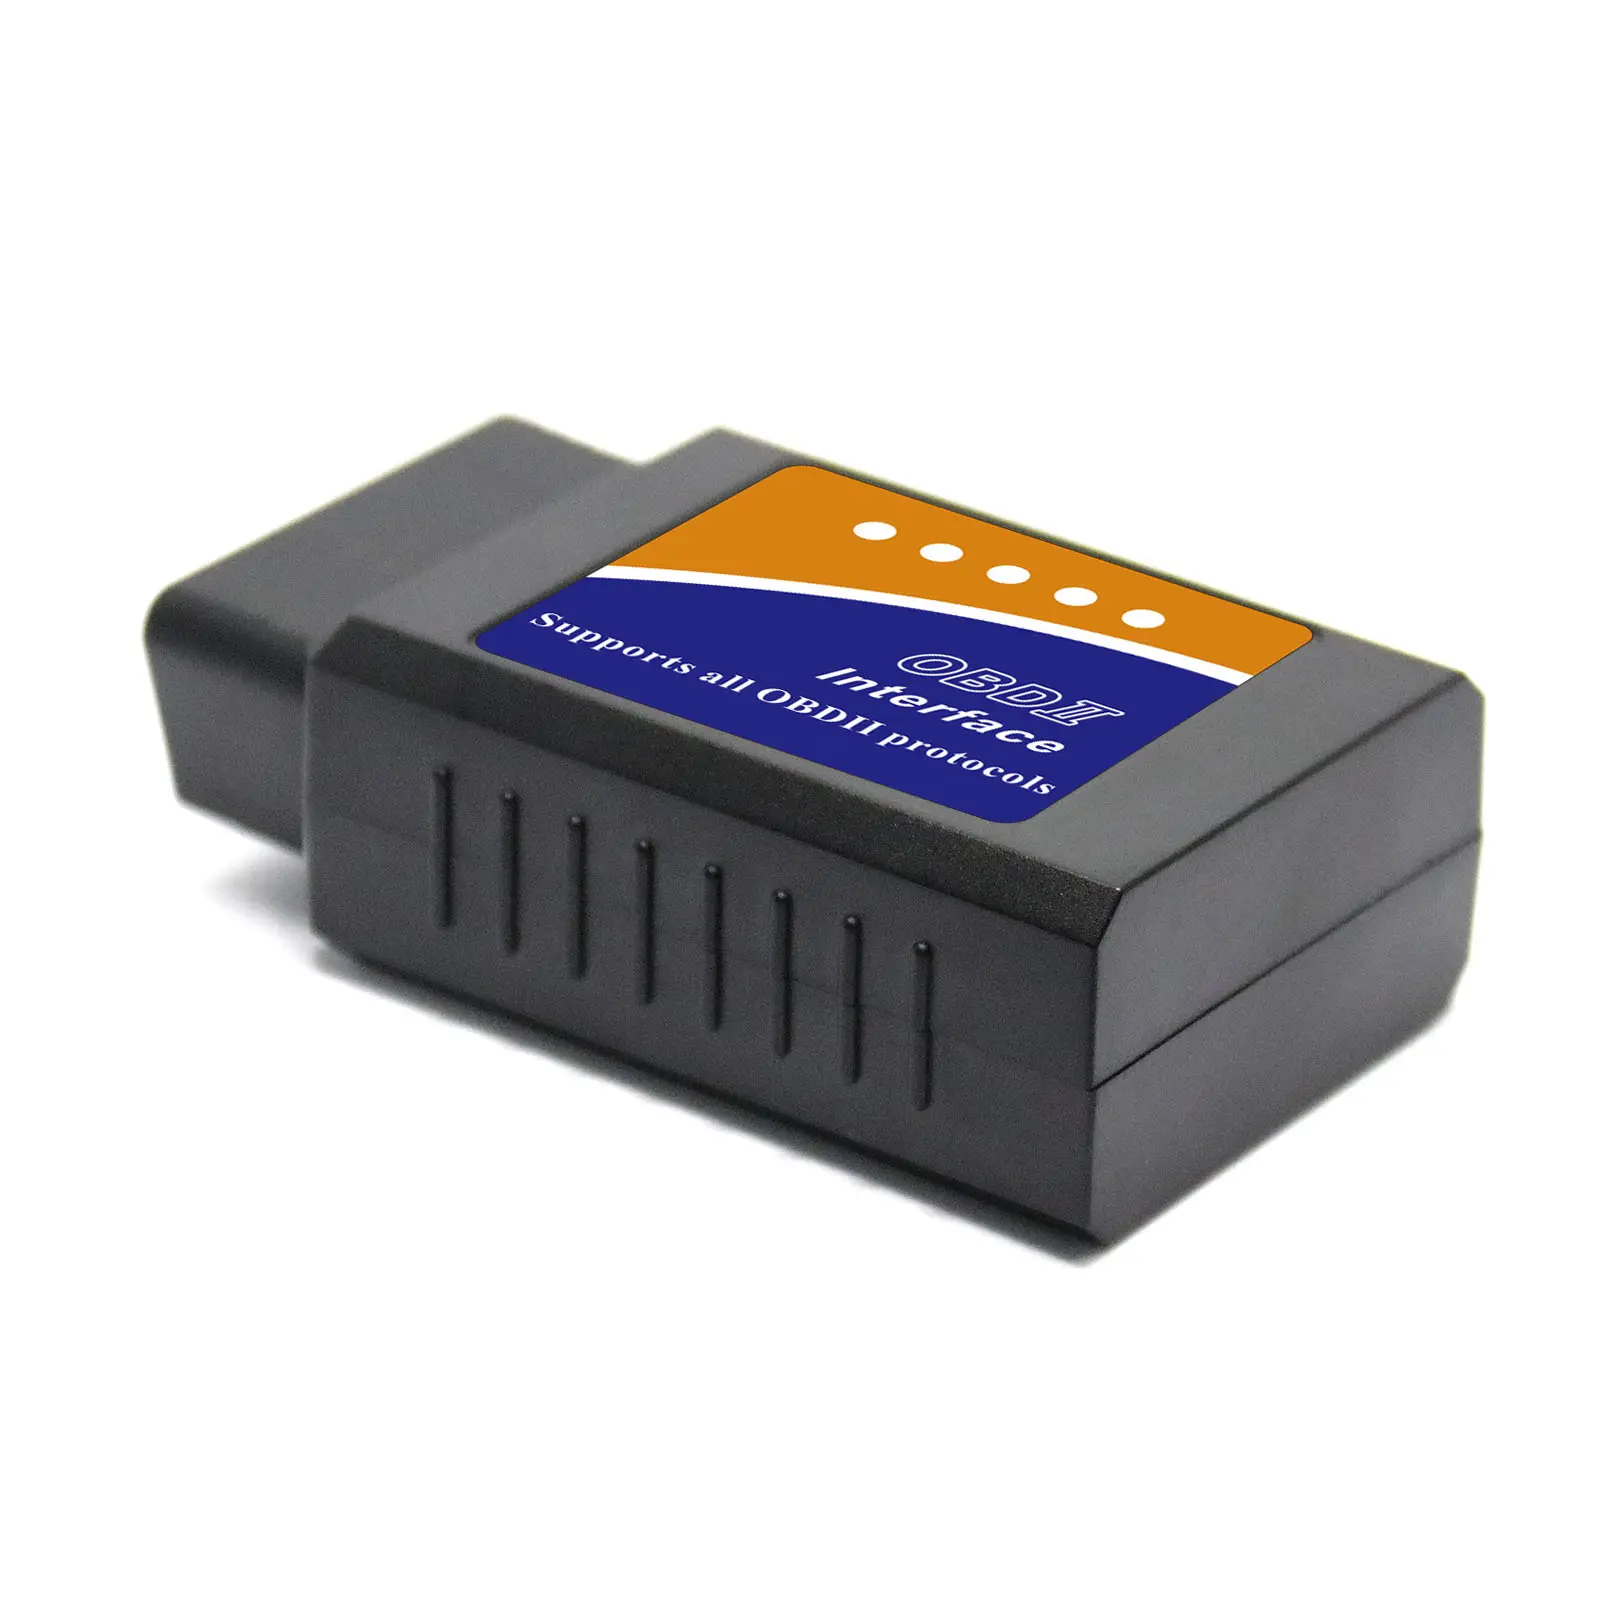 Auto scanner top OBDII ELM 327 V1.5 obd2 adapter ARM program automatic car diagnostic scanner for Android/Window